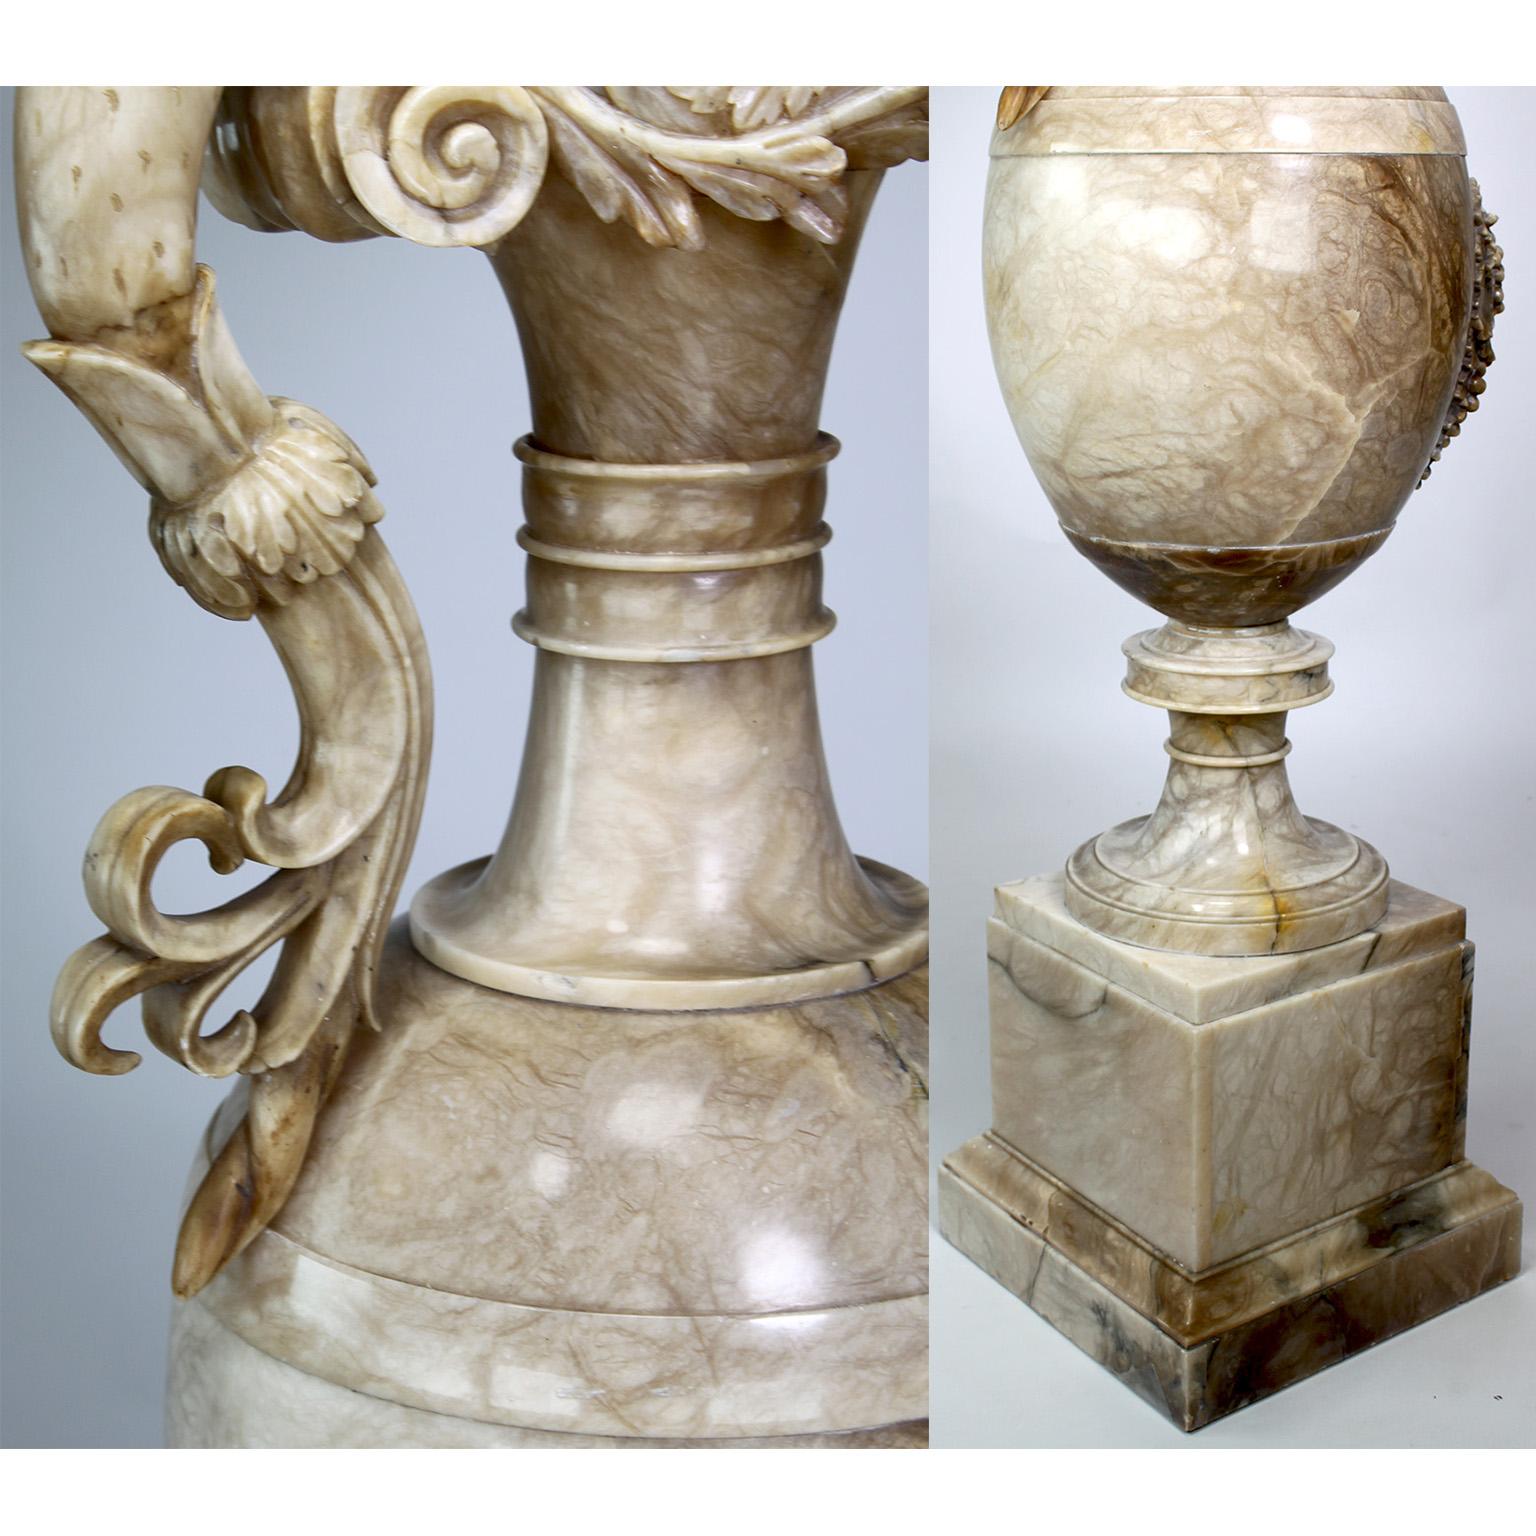 Monumental Italian 19th Century Renaissance Revival Style Carved Alabaster Urn  For Sale 14